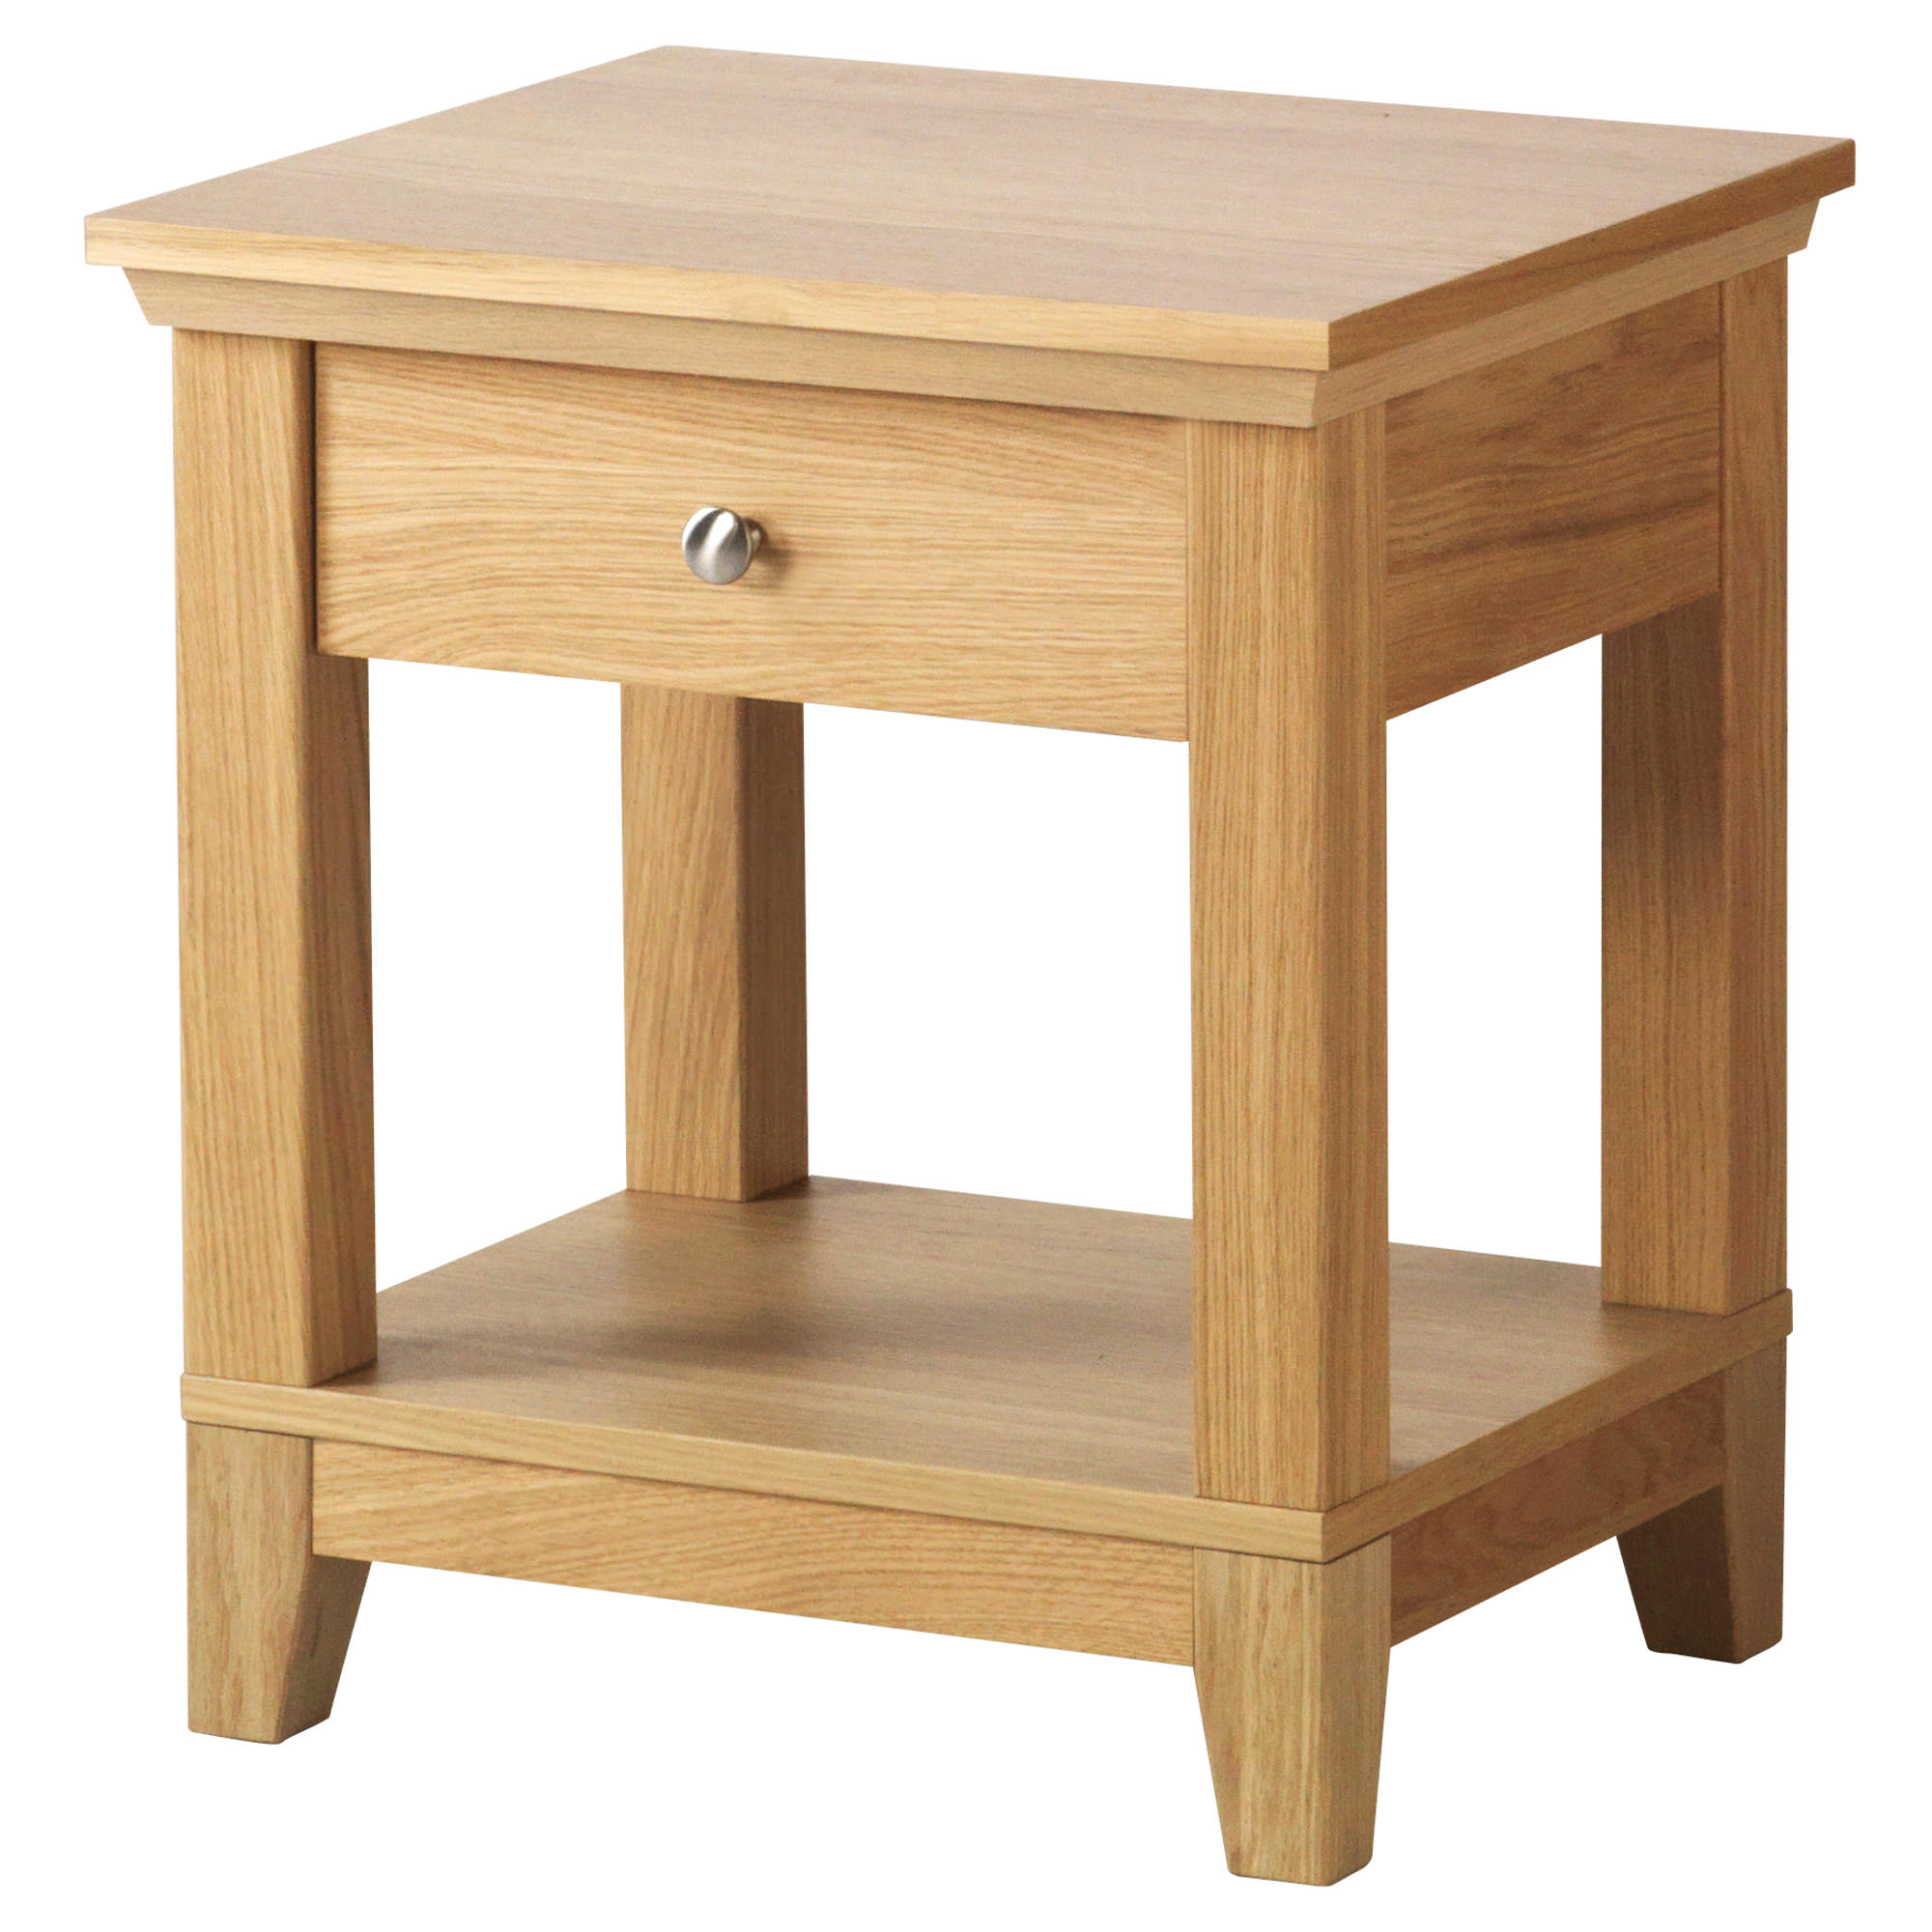 Image of: Bedside Table Height